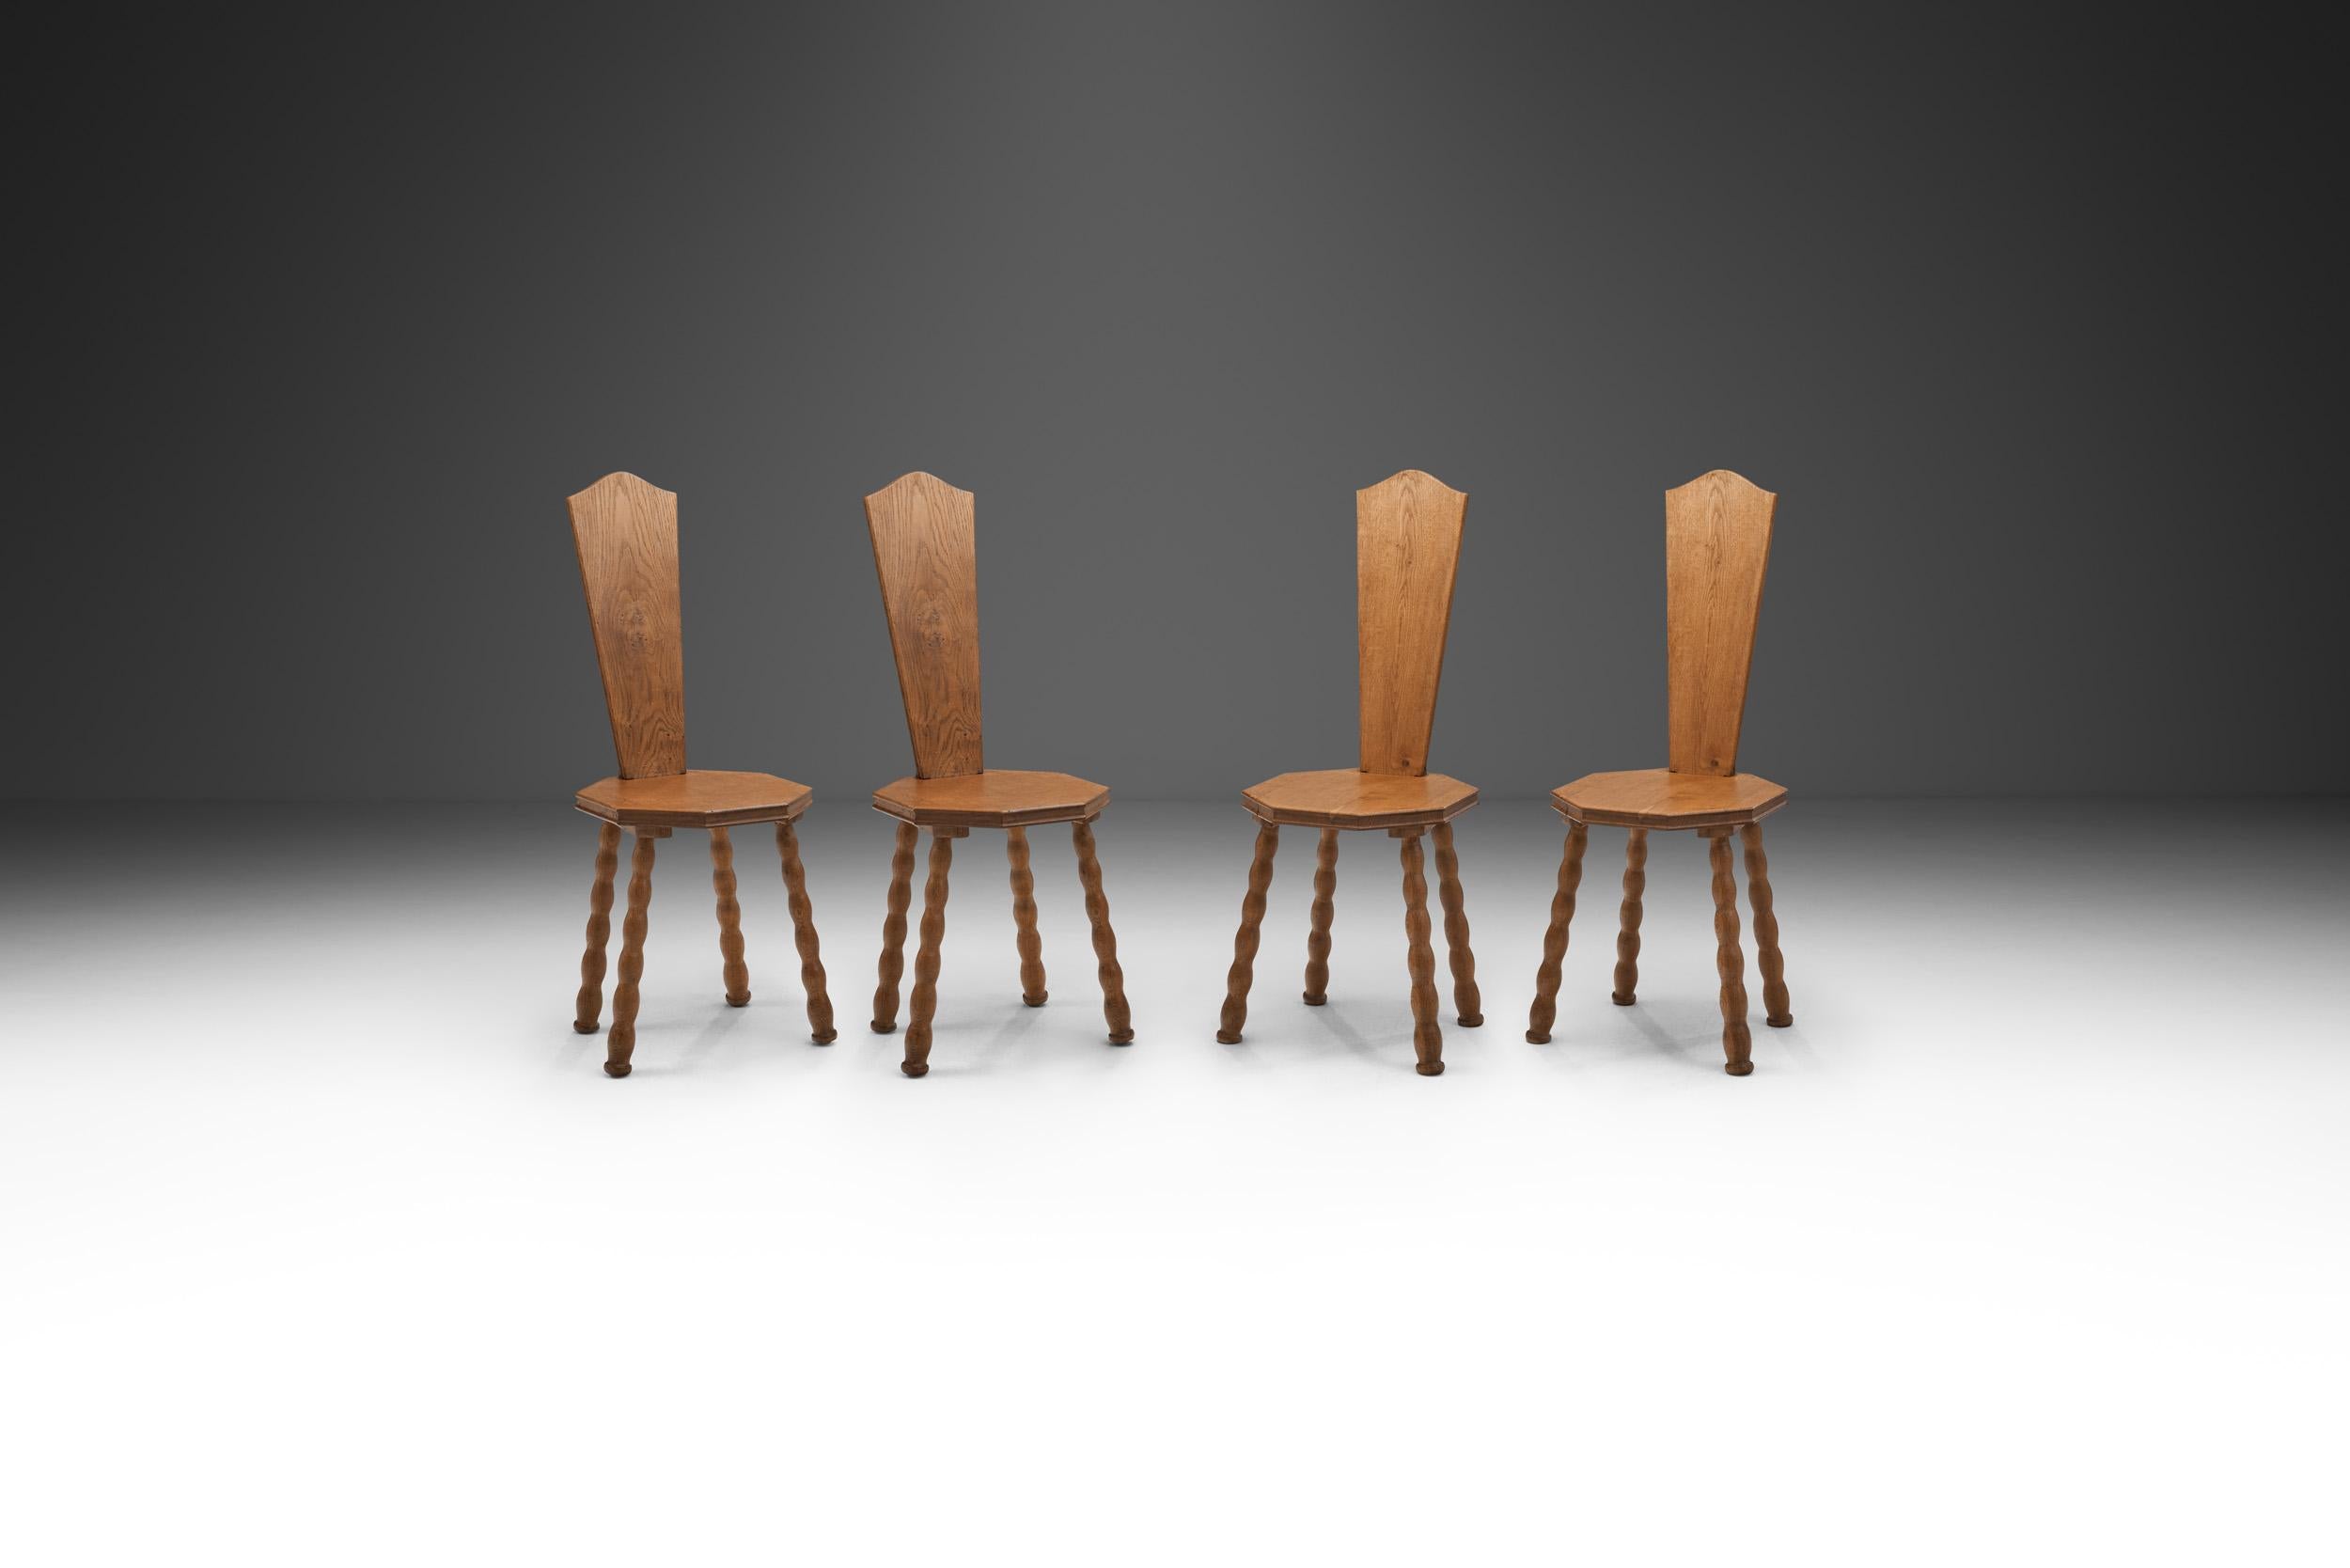 Modern Set of 4 Sculptural Patinated Oak Spinning Chairs, Europe ca early 20th century For Sale